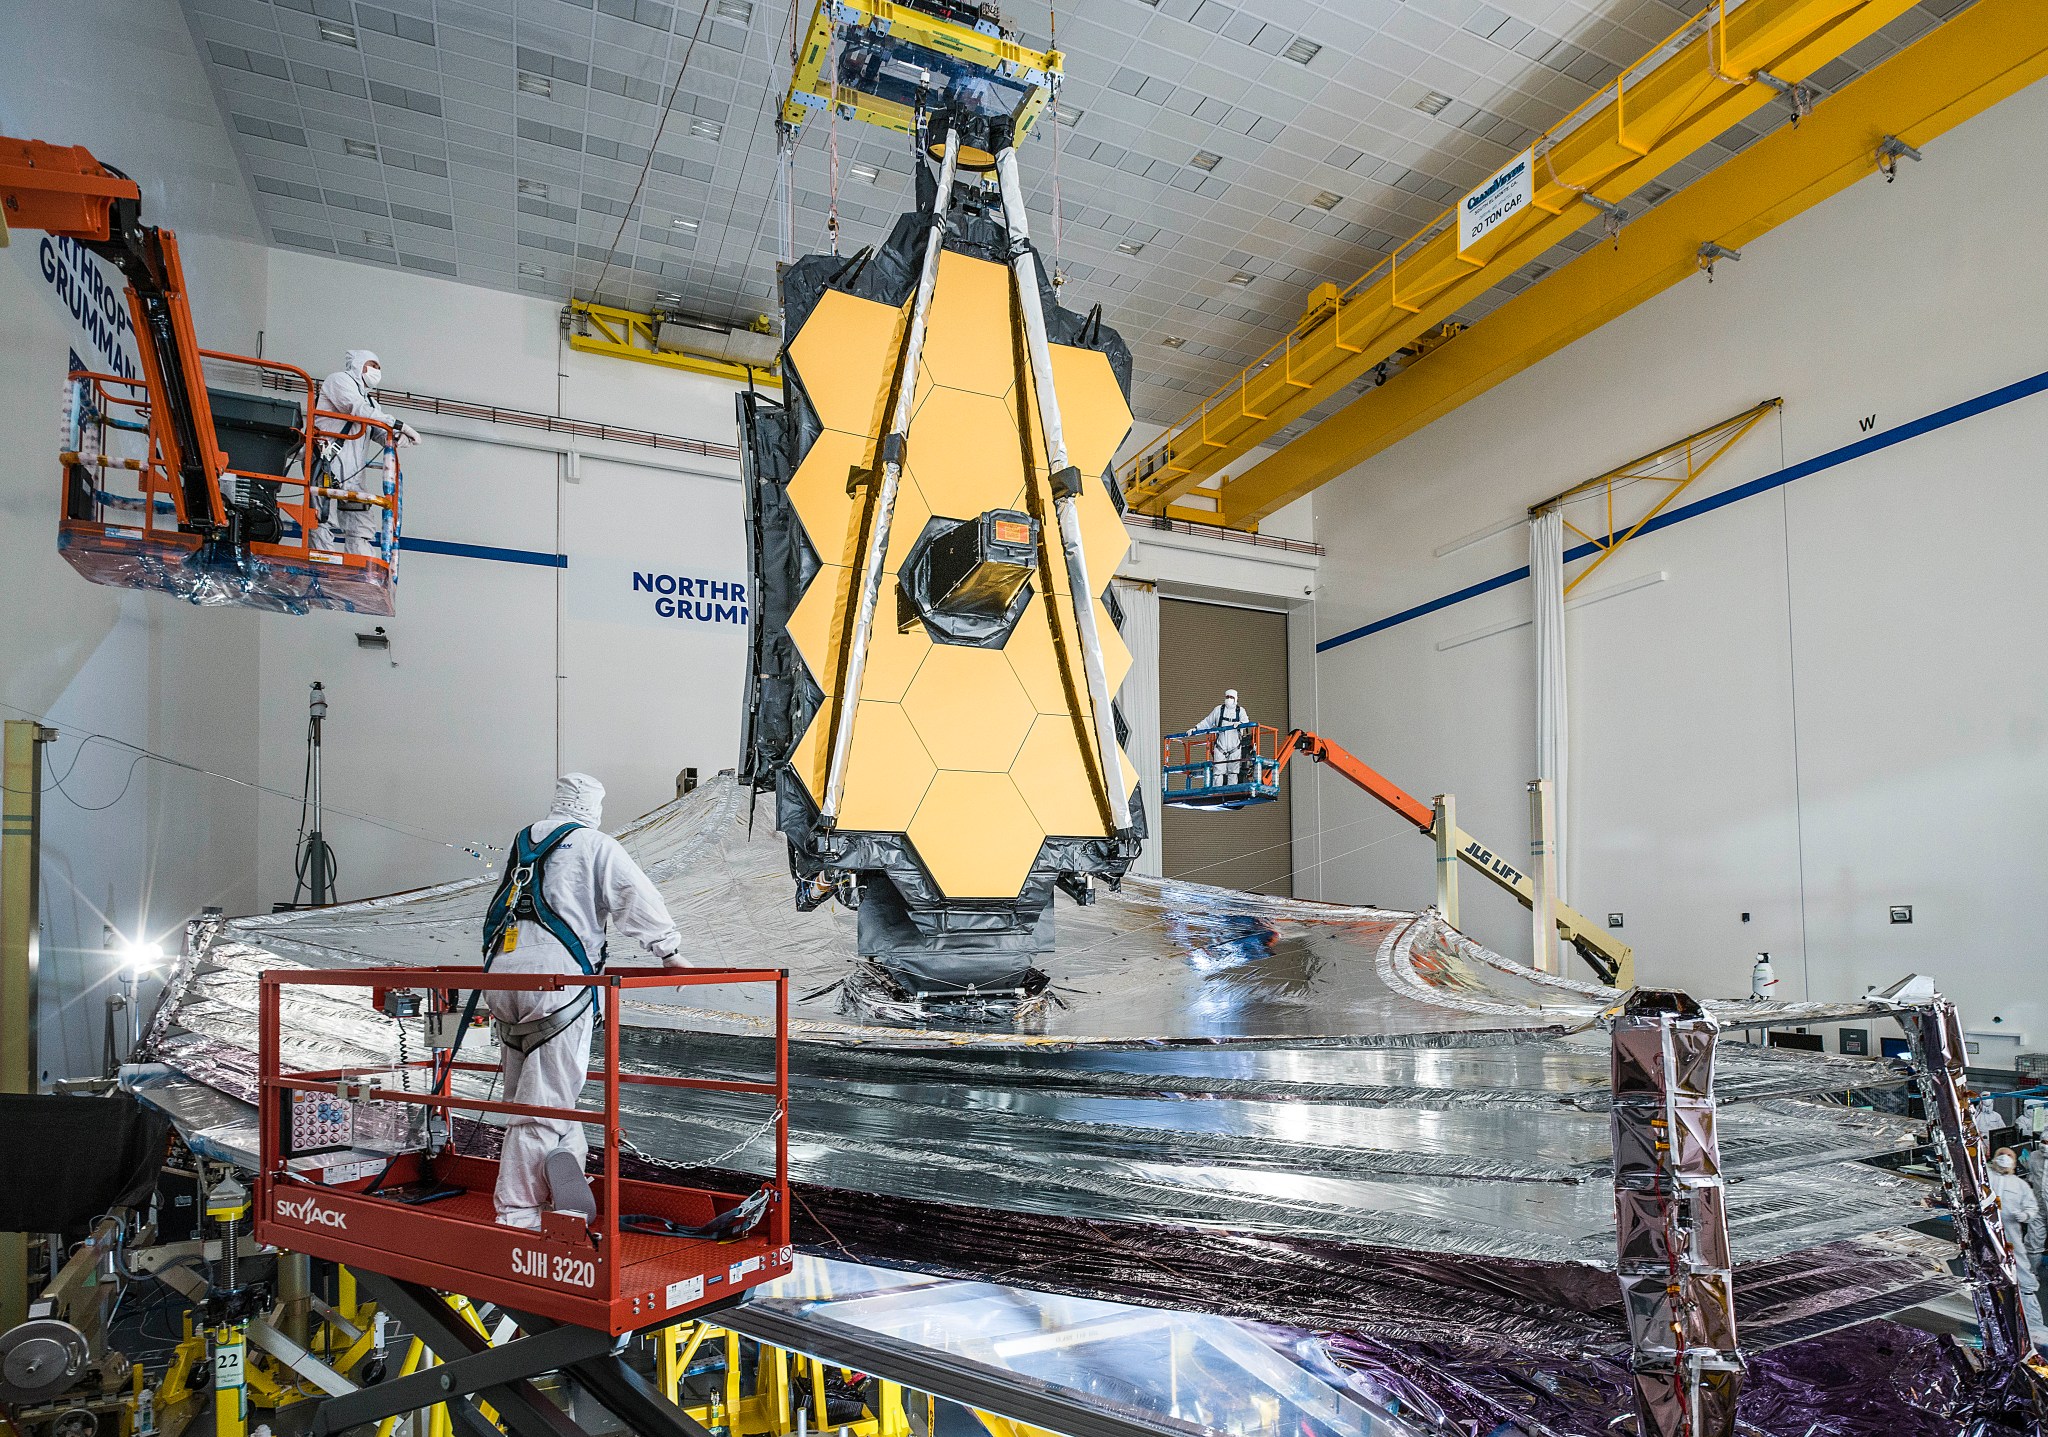 The James Webb Space Telescope, comprised of a flat, multi-layered silver sunshield stretched out horizontally like sails underneath a vertical strip of gold hexagonal mirror panels. The telescope is under construction, with two people in white coveralls standing on red platforms overlooking the white clean room where the telescope is sitting. Blue text reading "Northrop Grumman" is partly visible on the back wall.